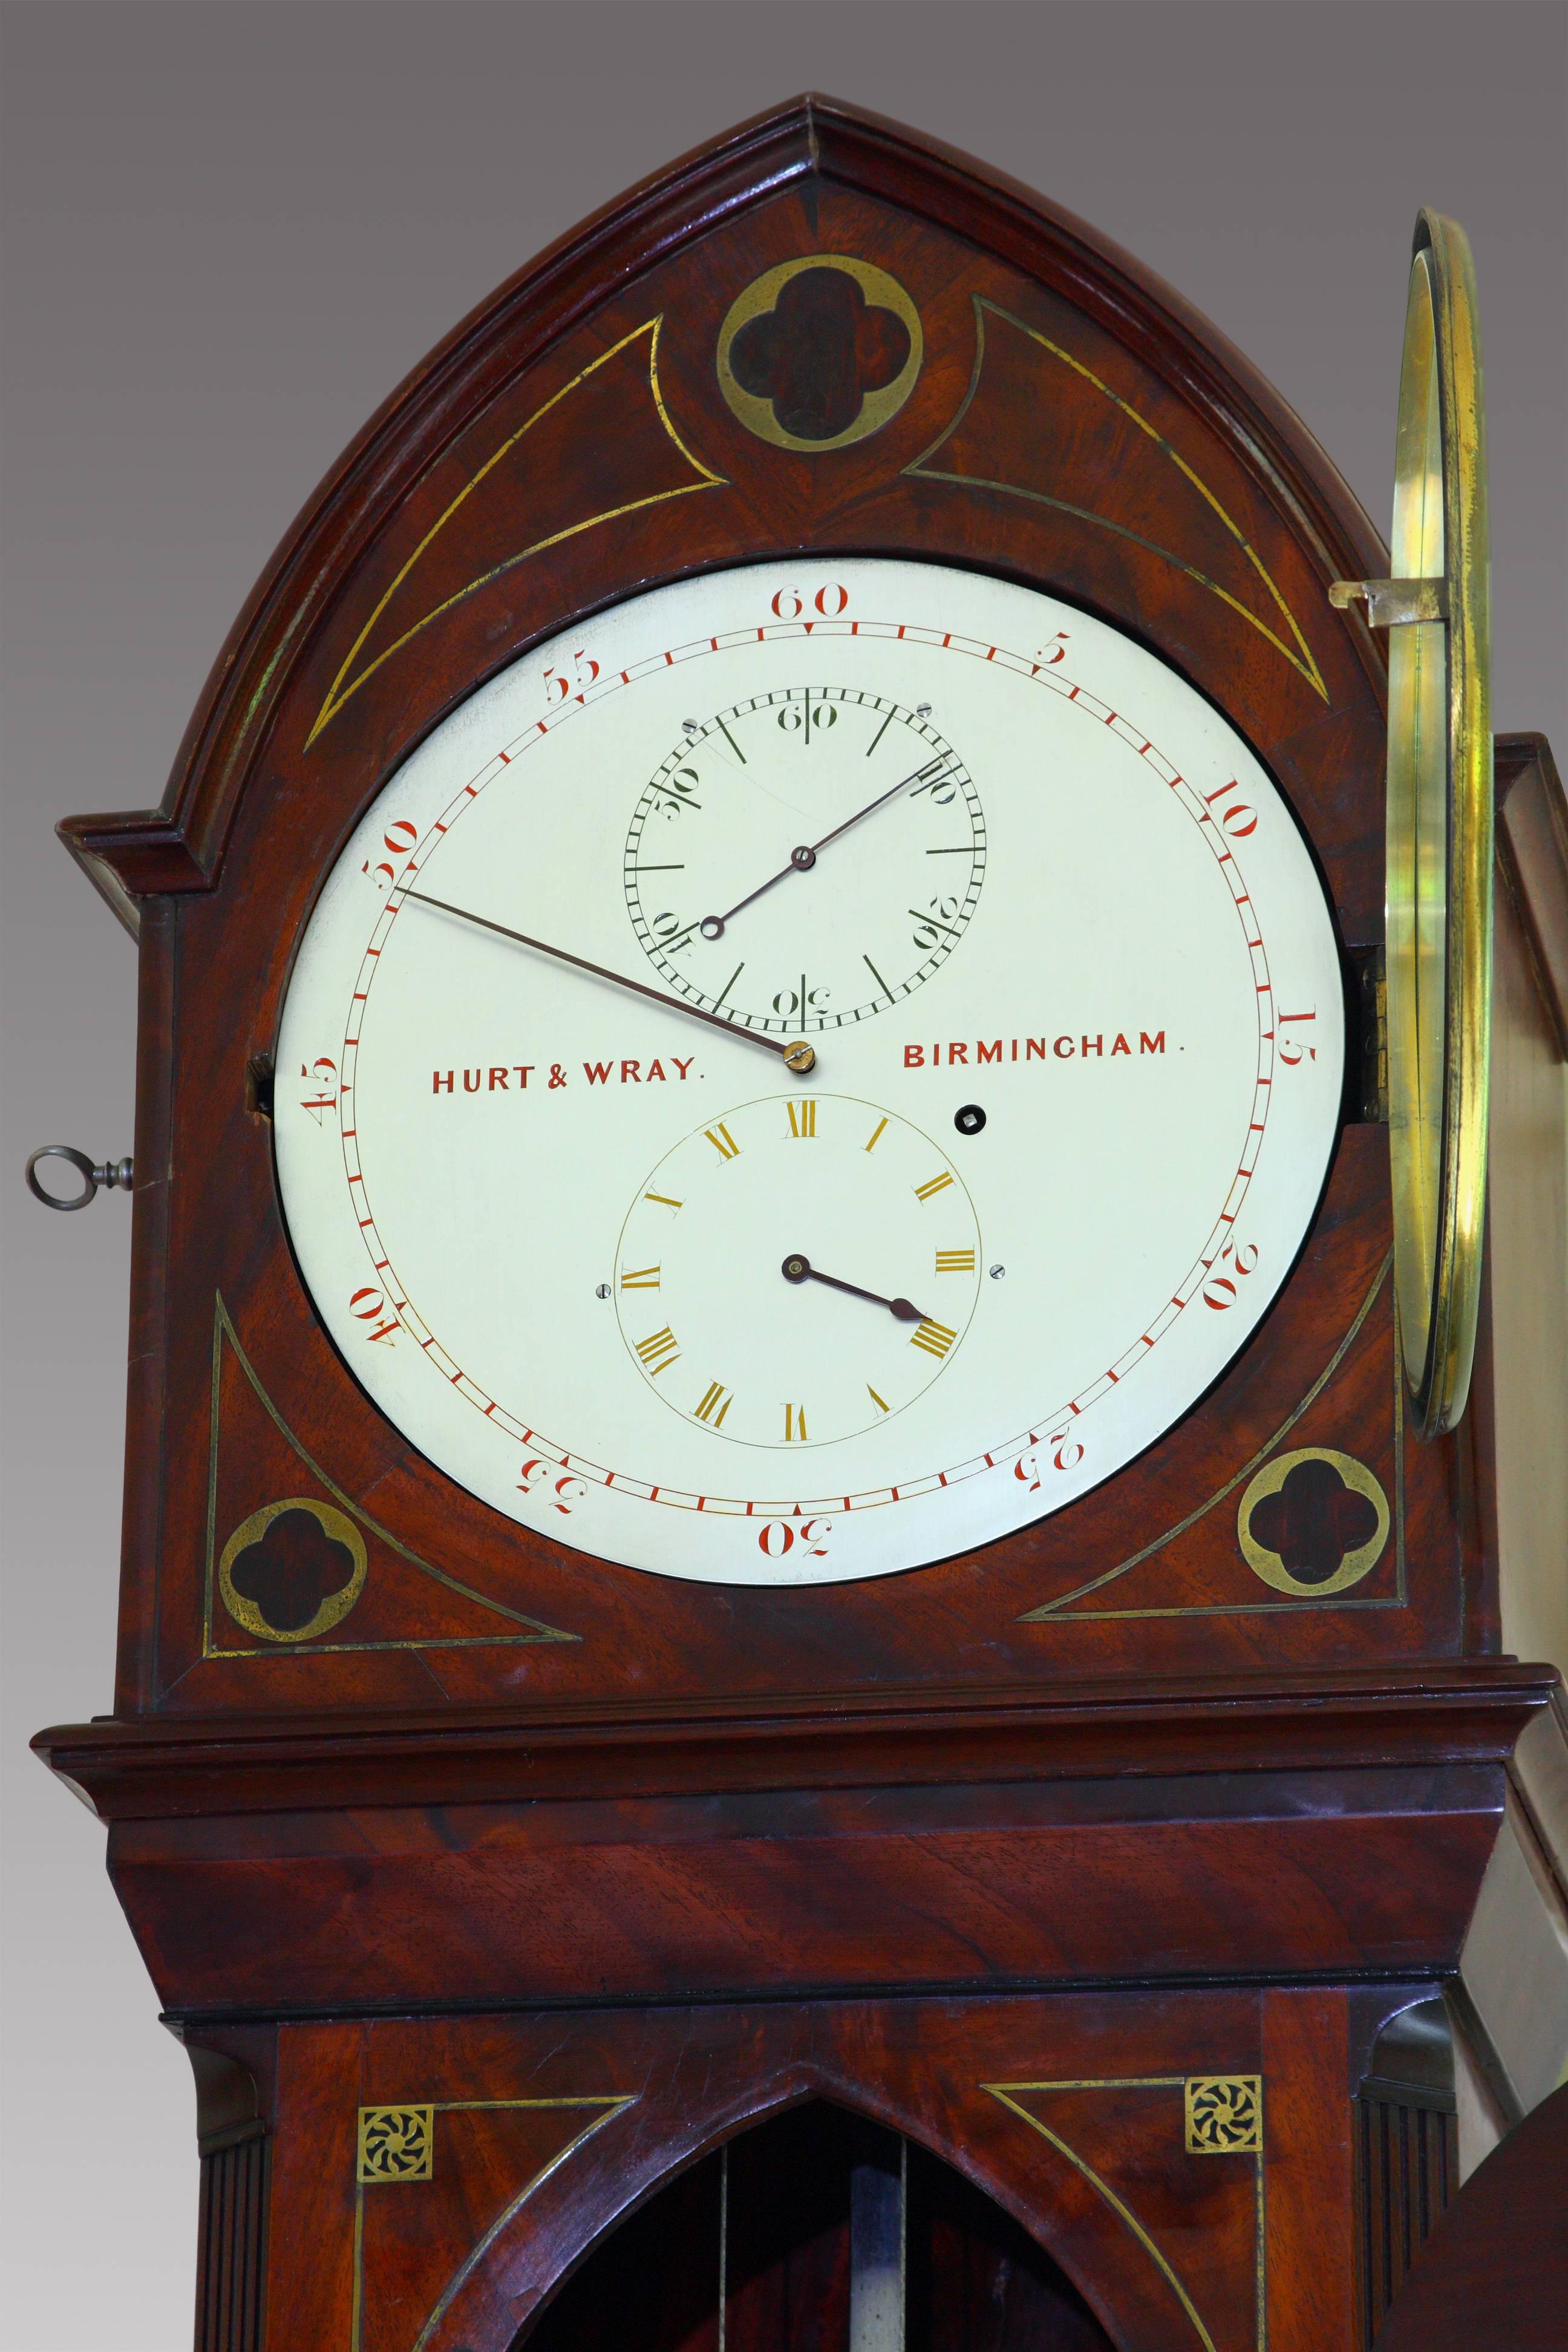 19th century floor standing mahogany regulator, circa 1840, with unusual tri-colored dial and Ritchie's compensation to the pendulum, signed Hurt & Wray, Birmingham. Gothic-inspired case with lancet top over brass inlays of quatrefoils over a lancet